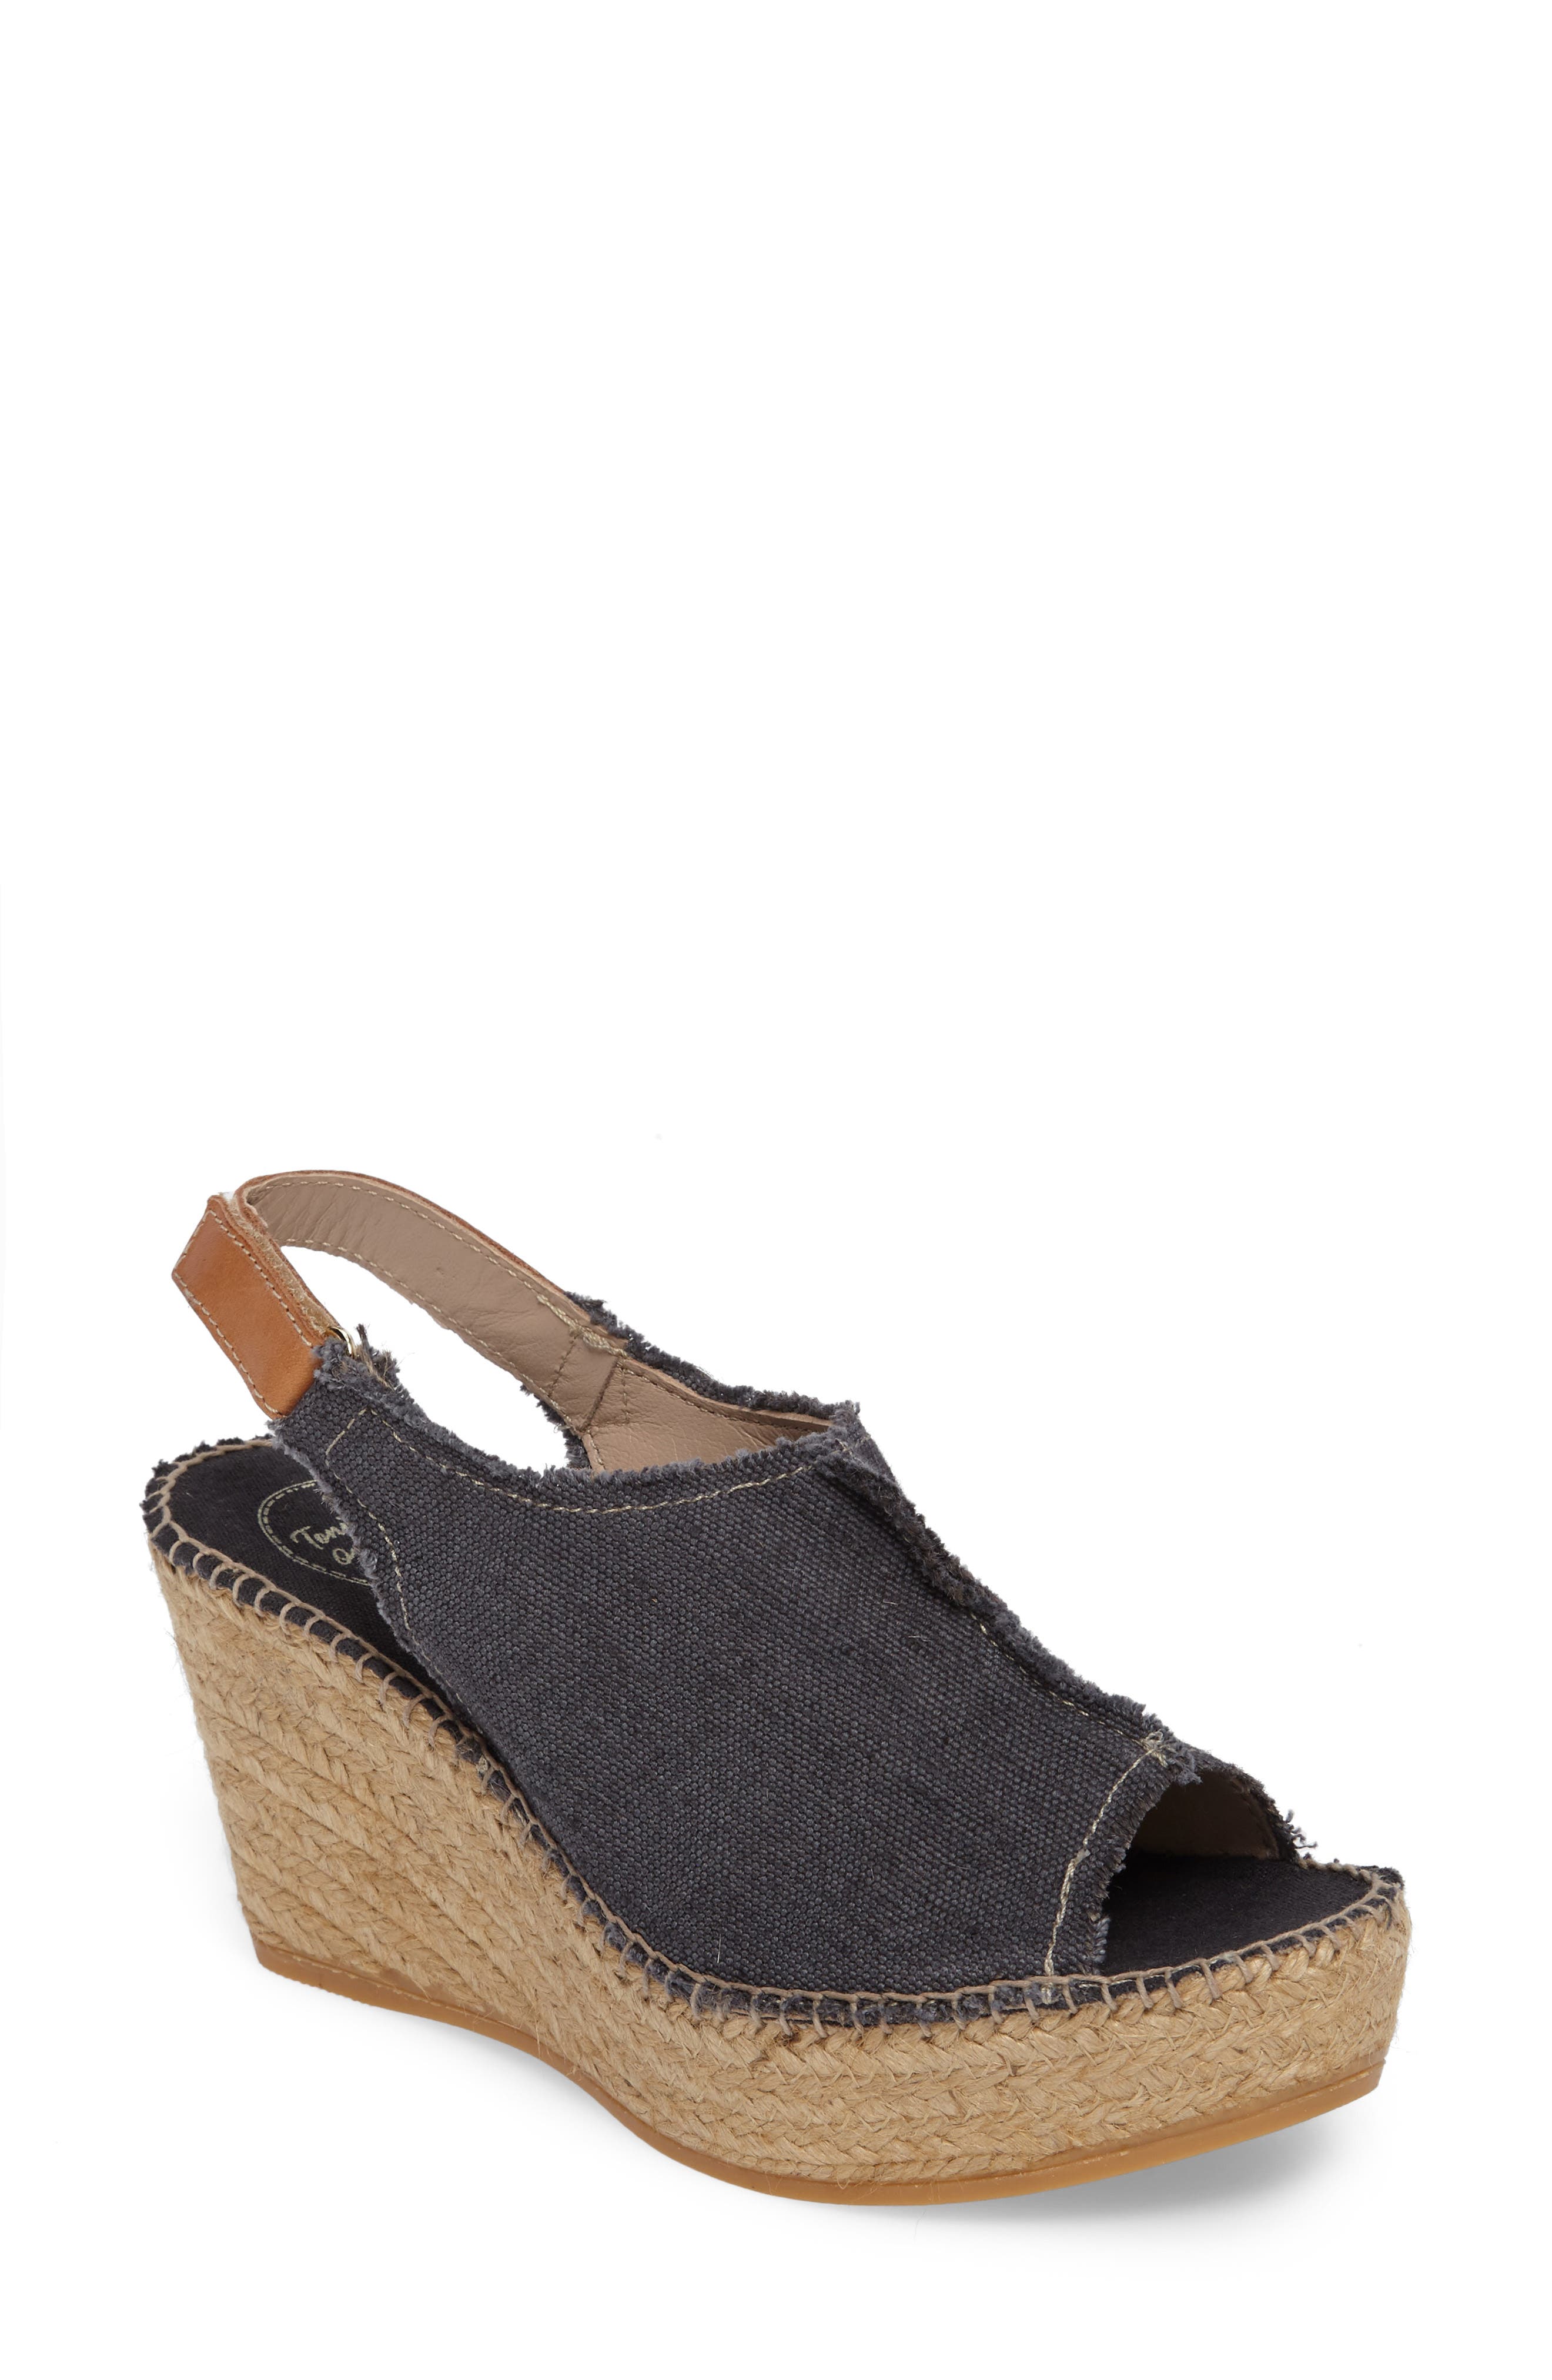 Nordstrom Women Shoes High Heels Wedges Wedge Sandals Lugano Espadrille Wedge Sandal in Tobacco Fabric at Nordstrom 